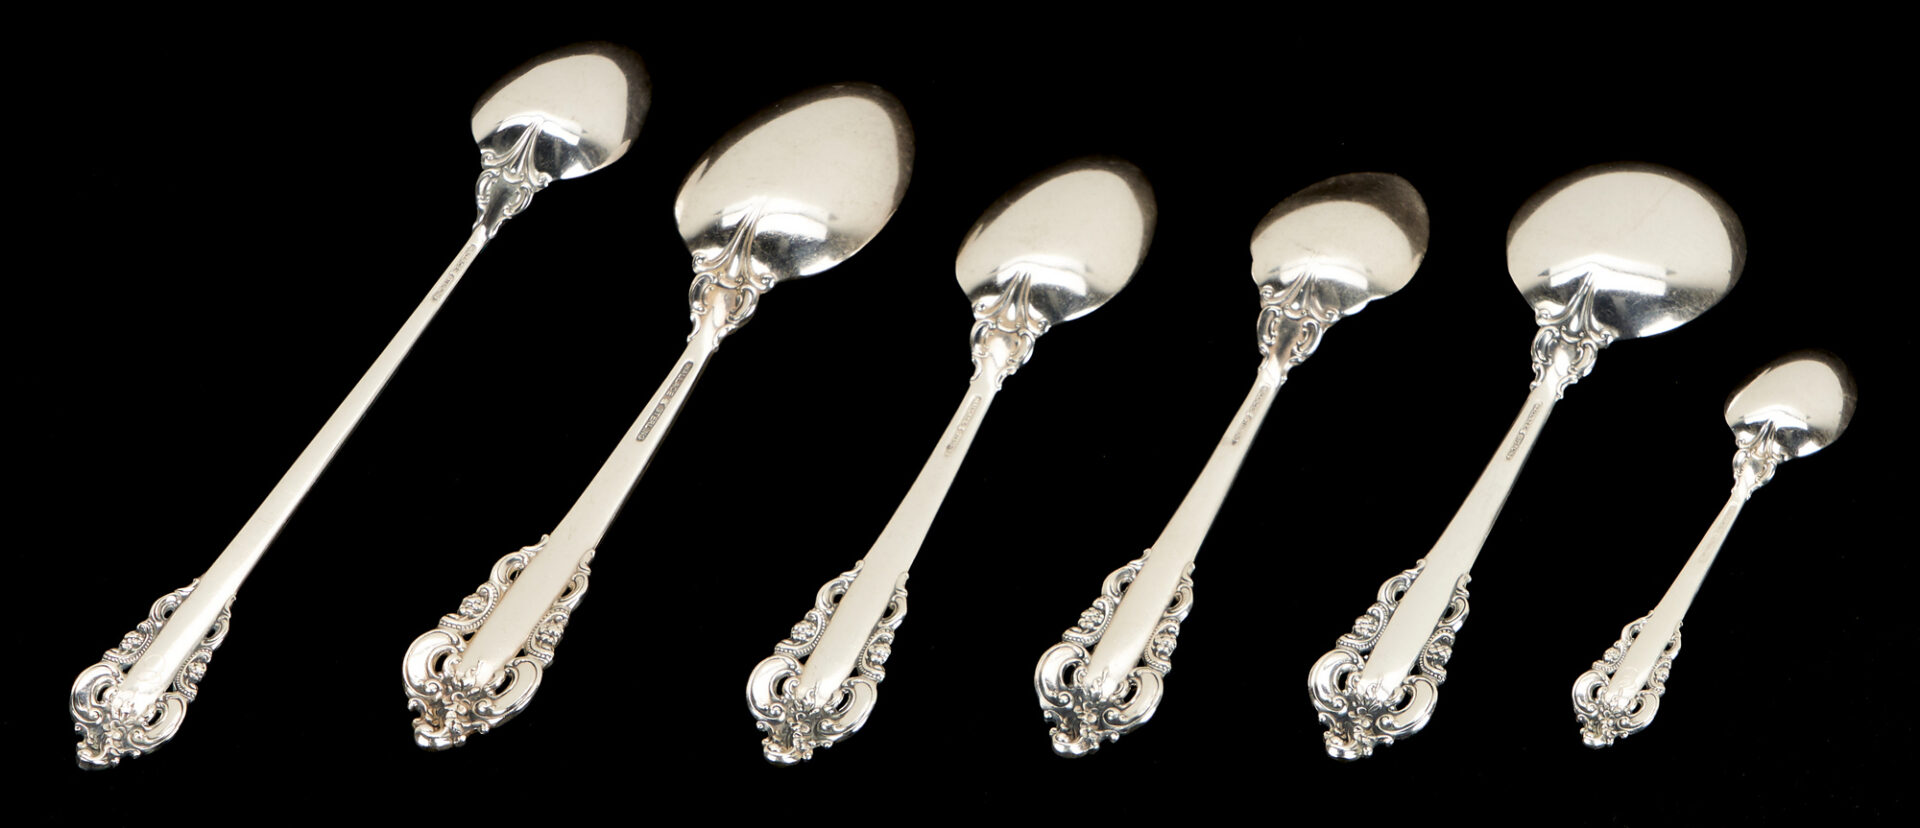 Lot 69: 239 pieces Wallace Grand Baroque Sterling Silver Flatware, Service for 12